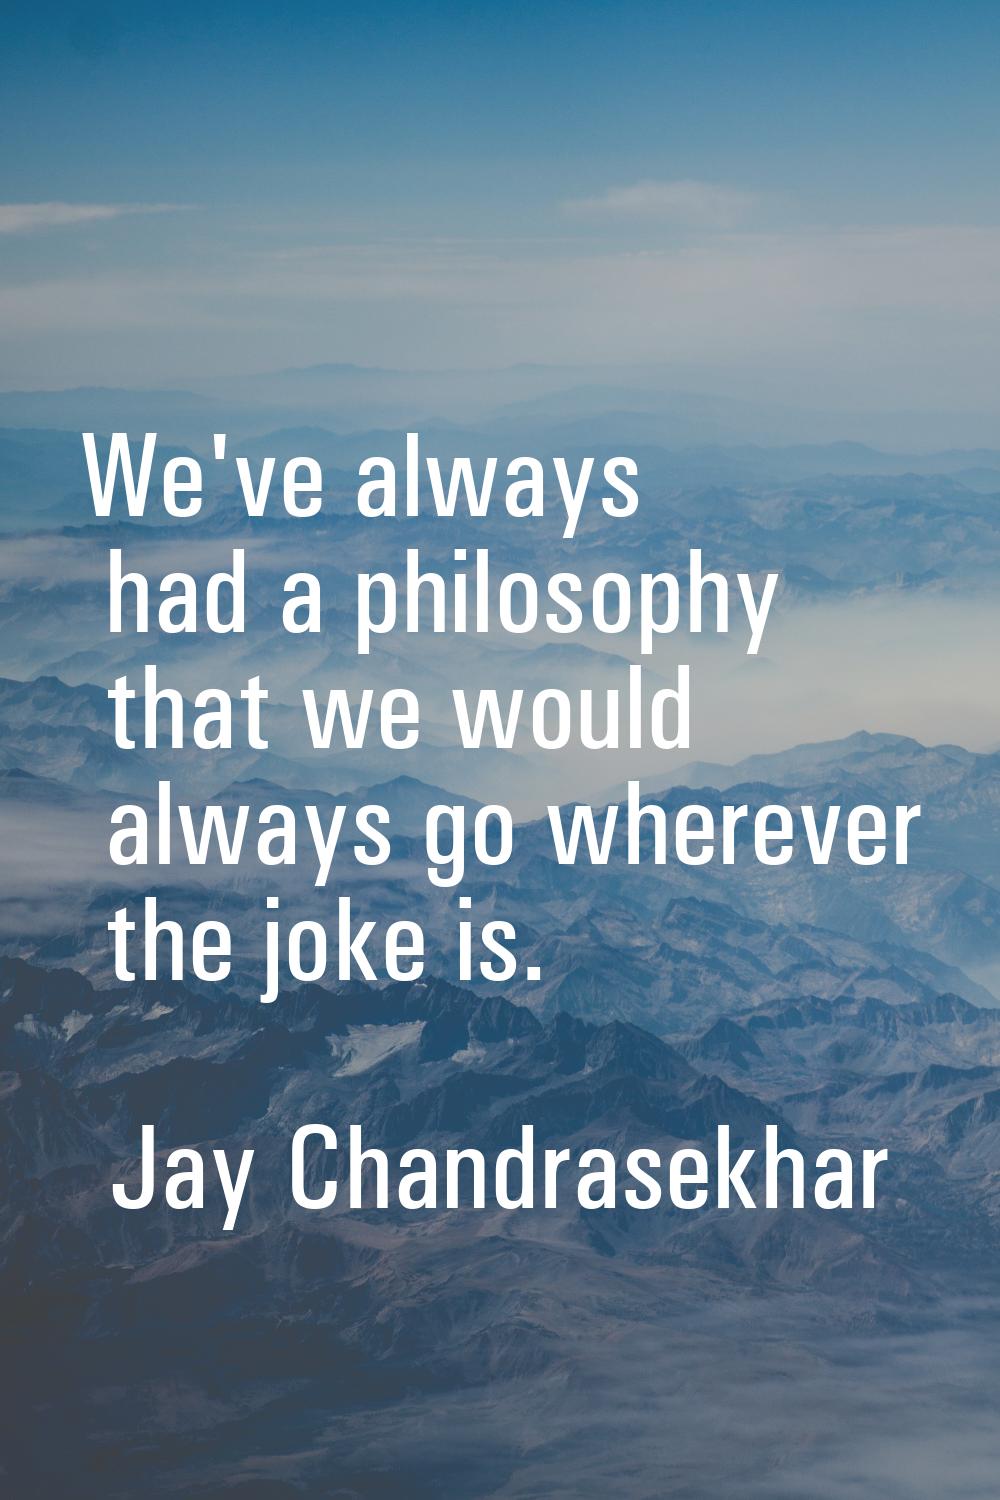 We've always had a philosophy that we would always go wherever the joke is.